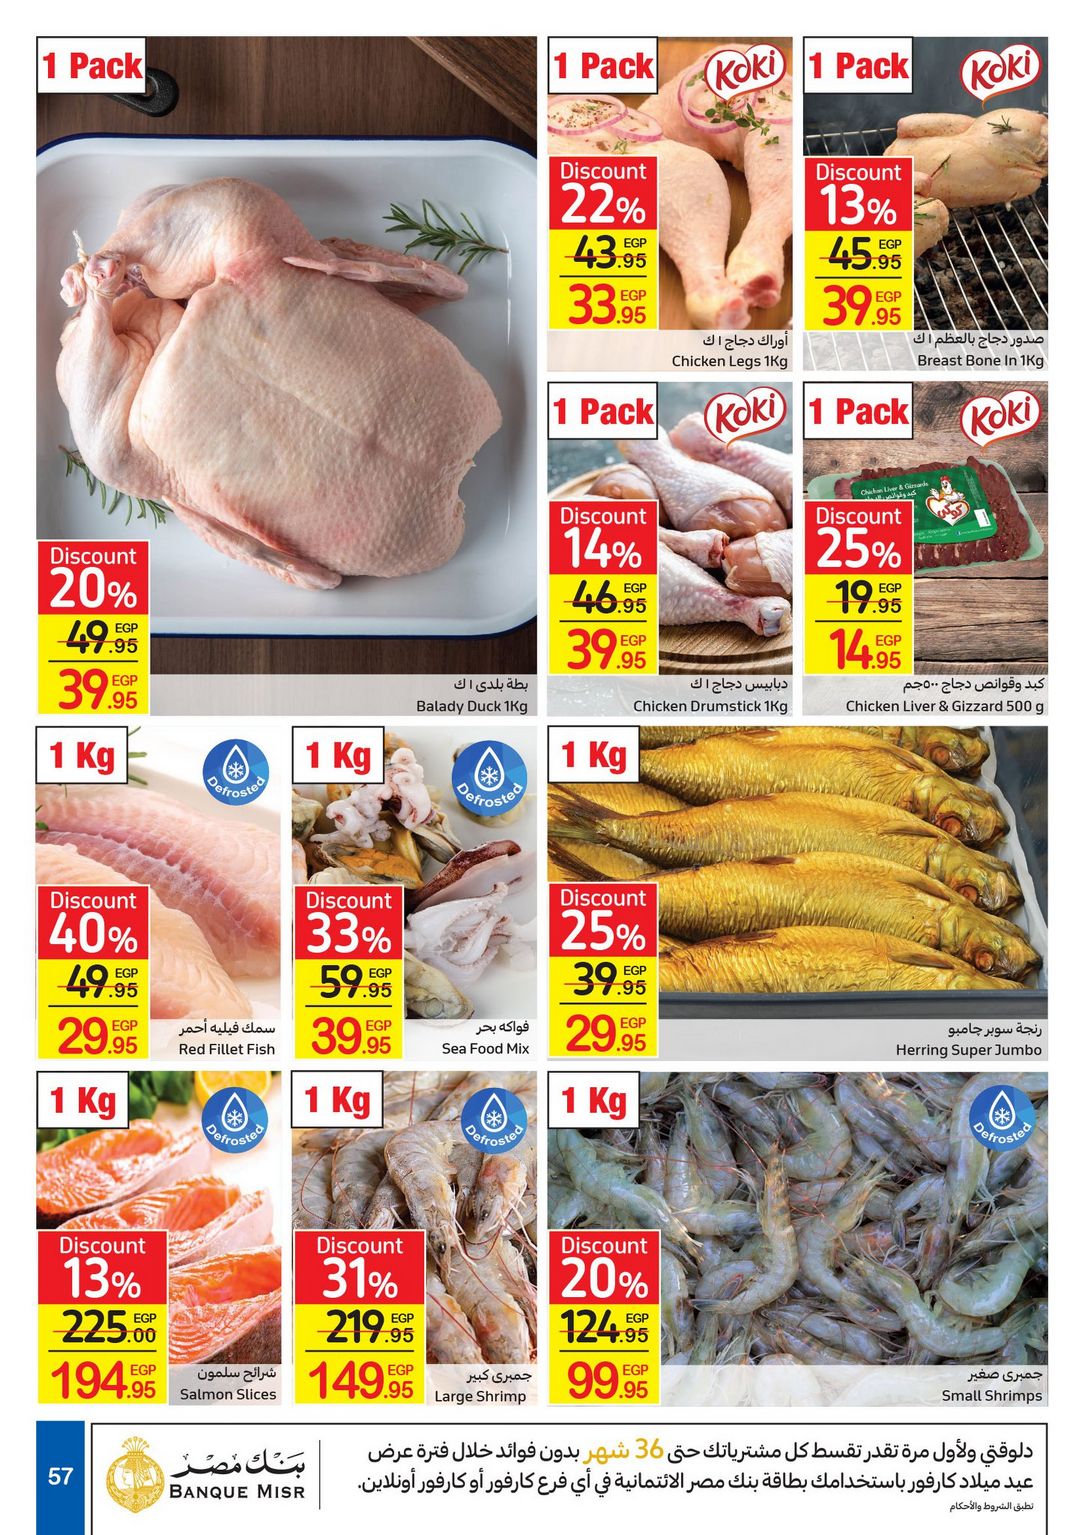 Carrefour Anniversary Offers till 18/2/2021 | Carrefour Egypt 59